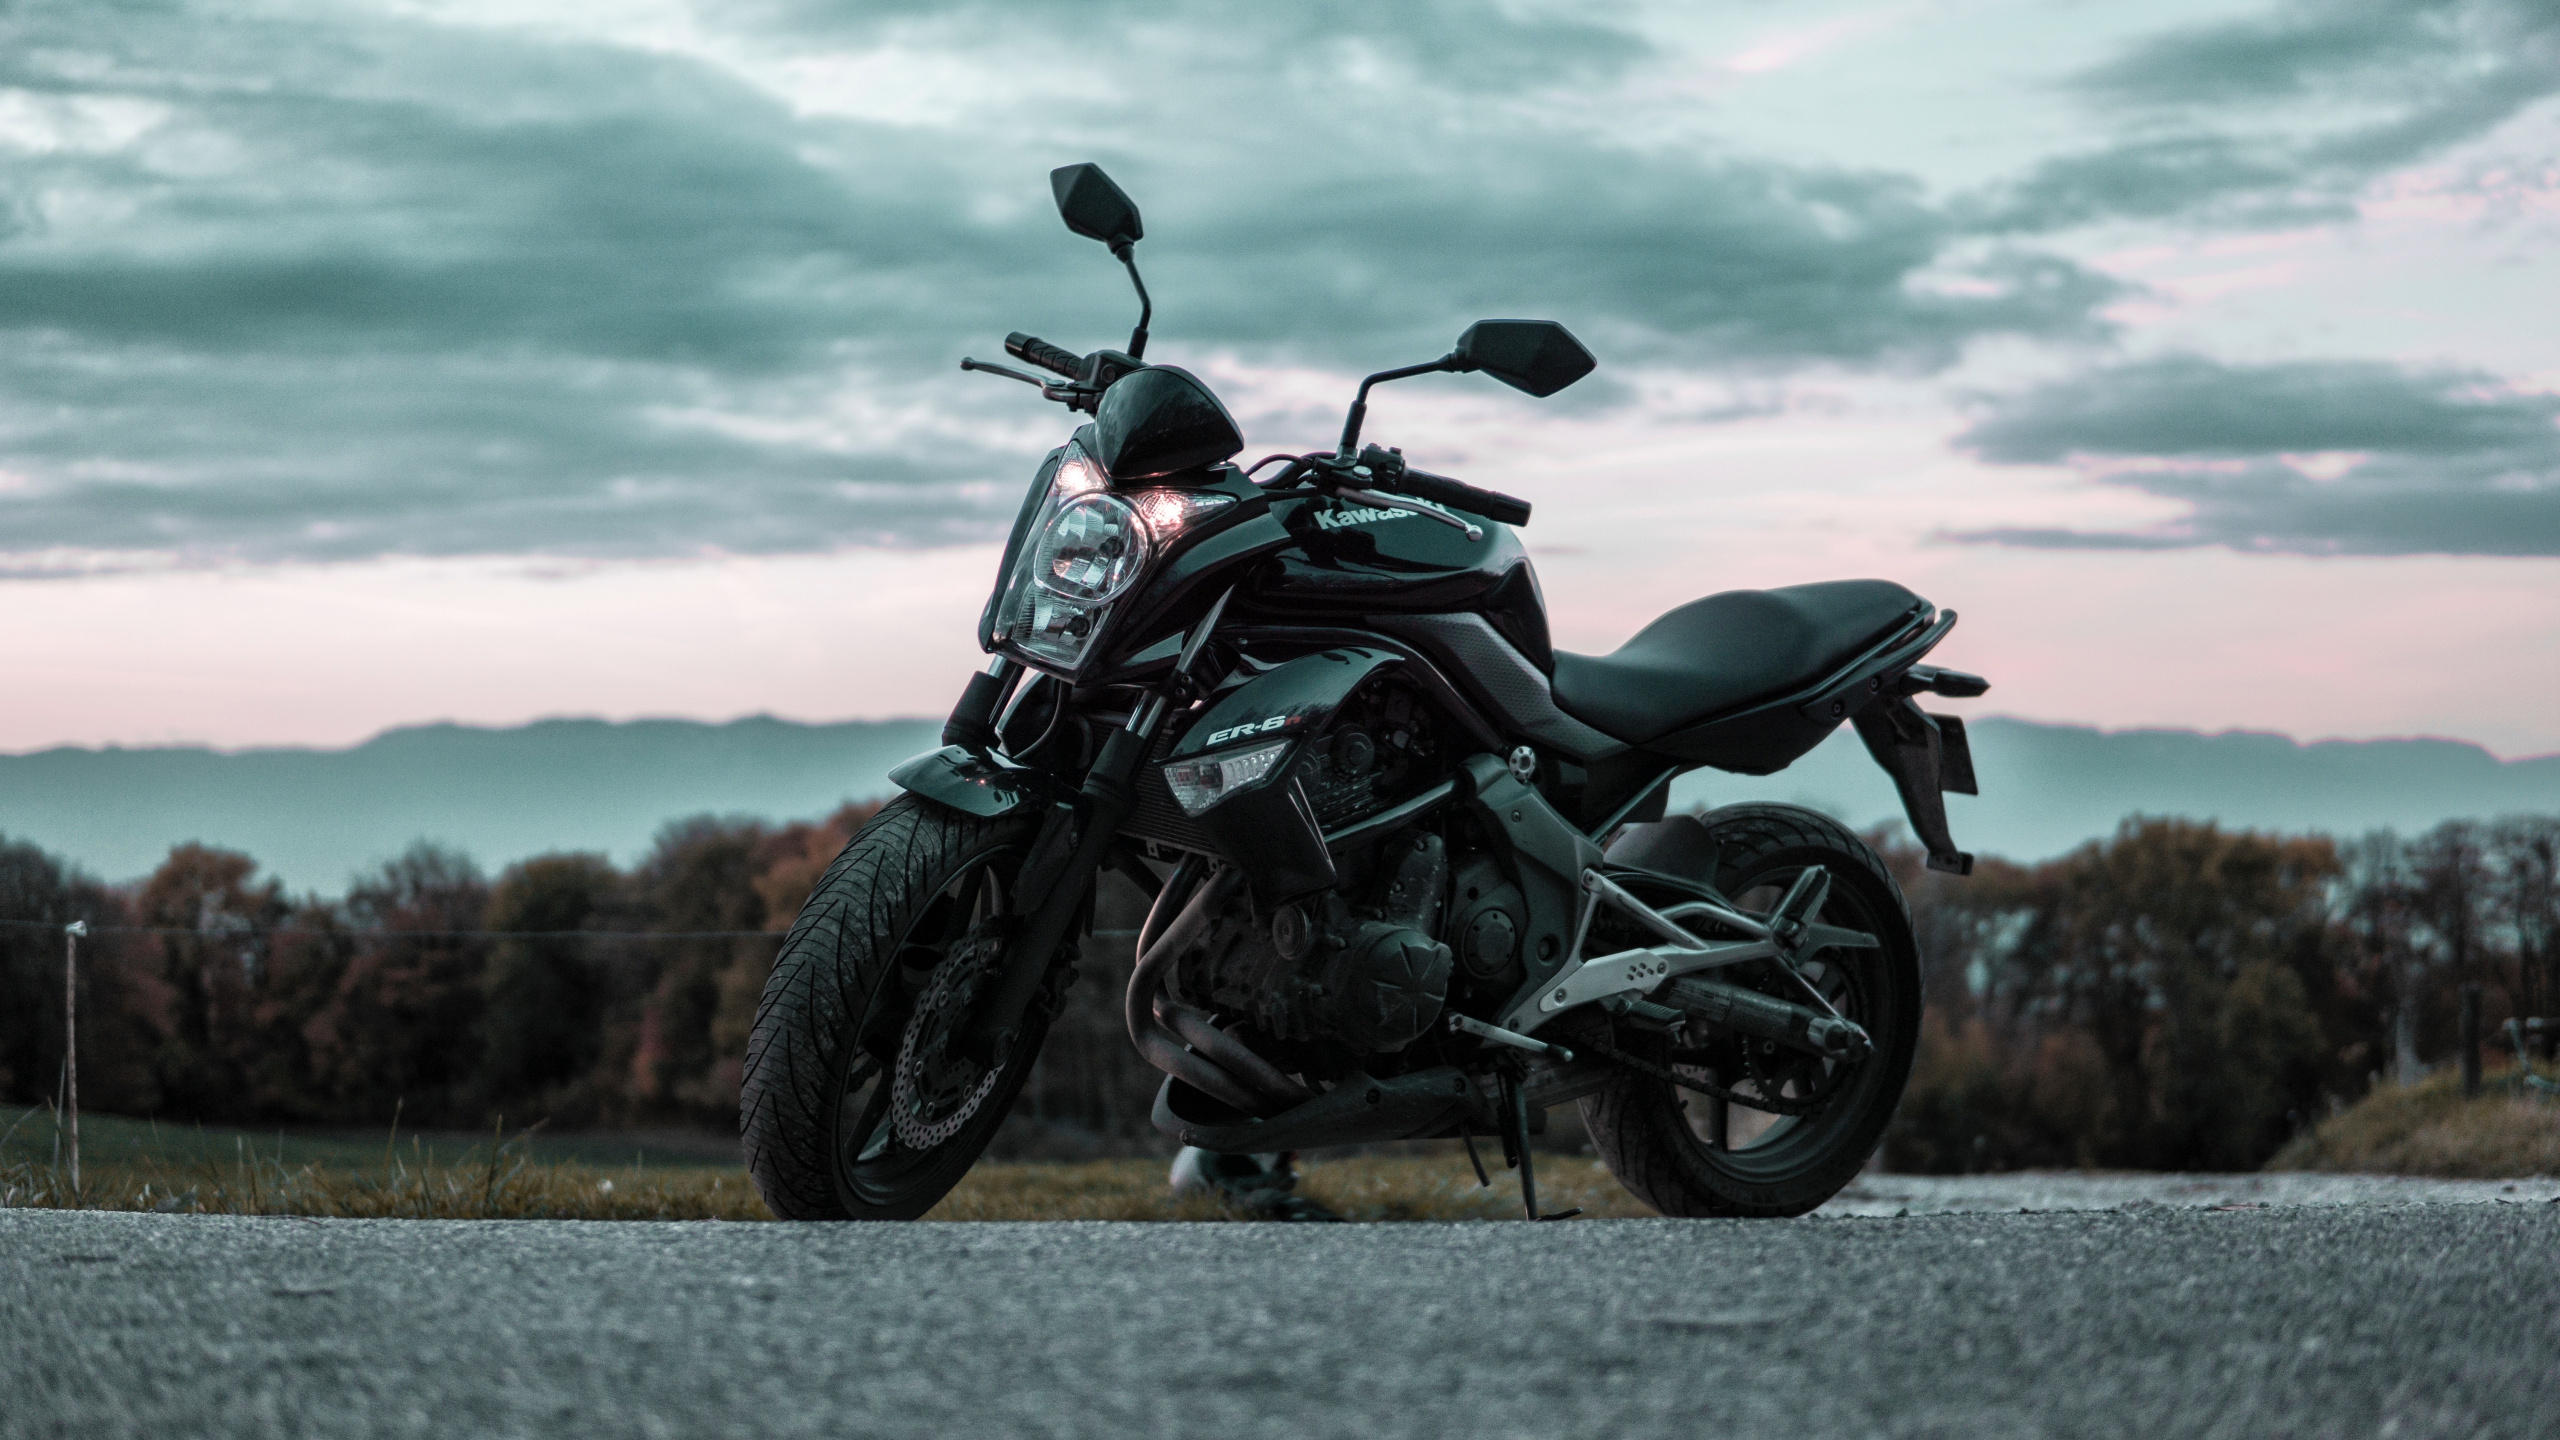 Black and Gray Motorcycle on Gray Asphalt Road During Daytime. Wallpaper in 2560x1440 Resolution